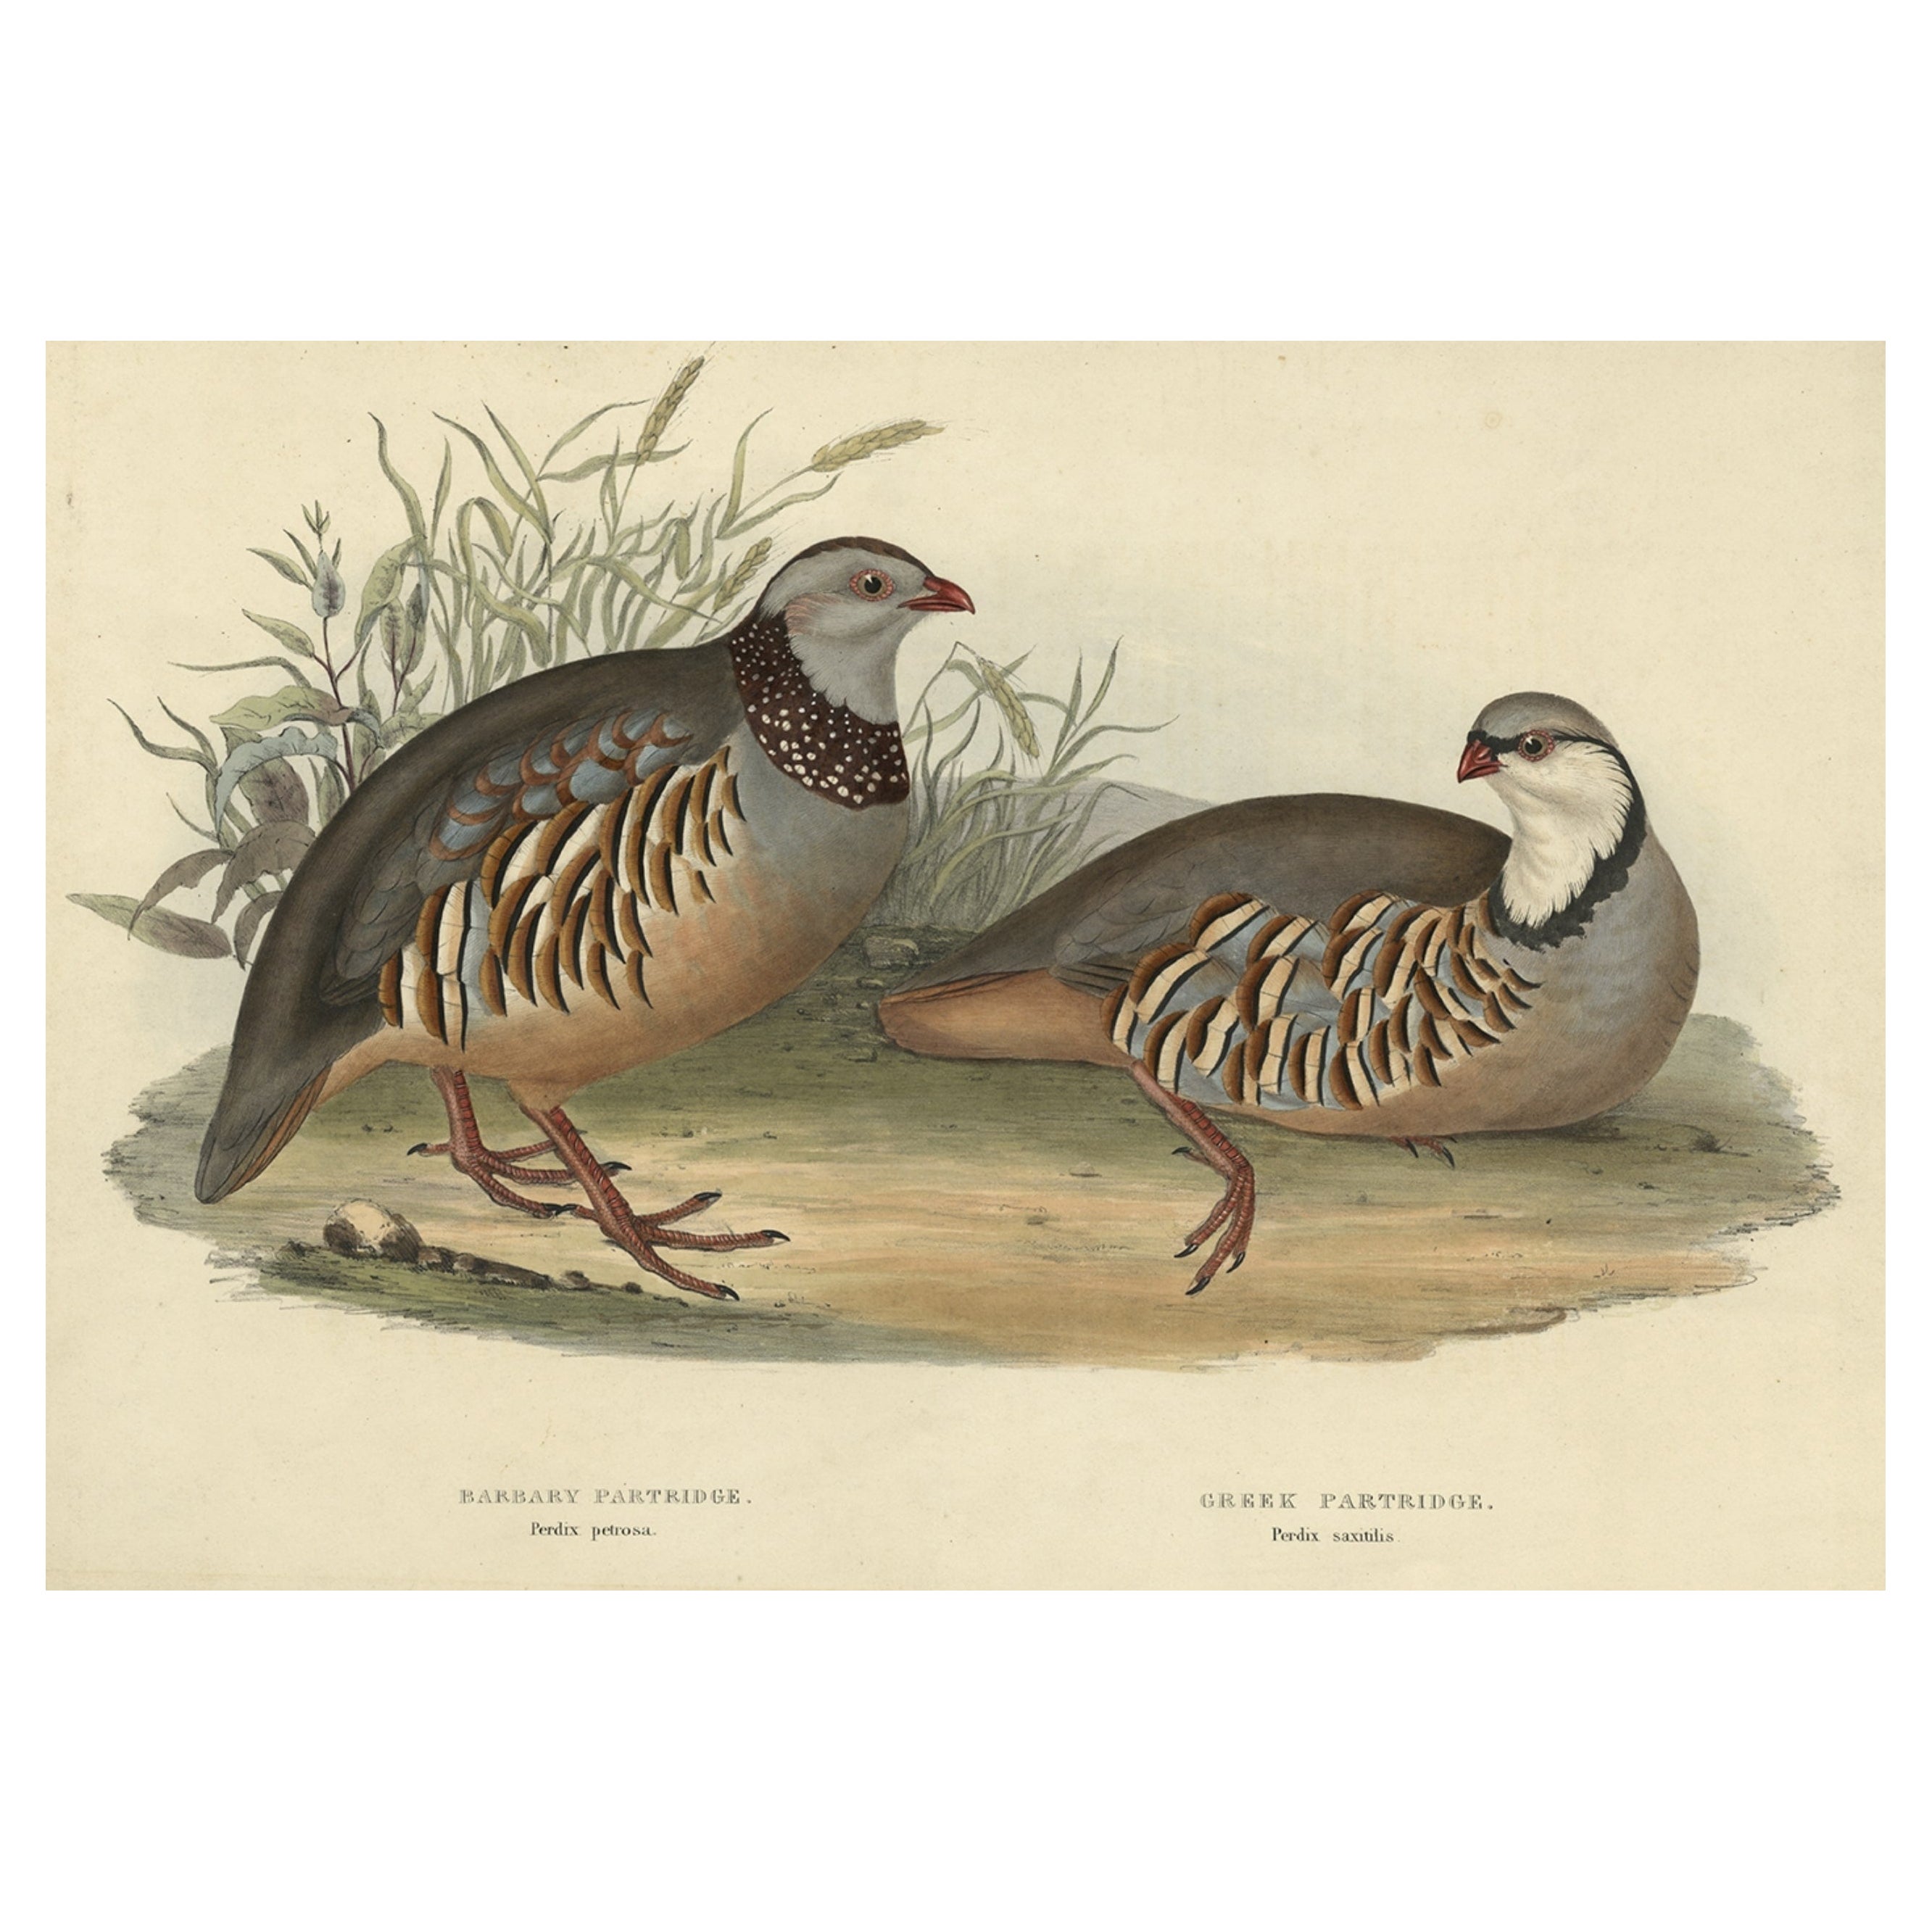 Antique Hand-Colored Print of the Barbary and Greek Partridge by Gould, 1832 For Sale